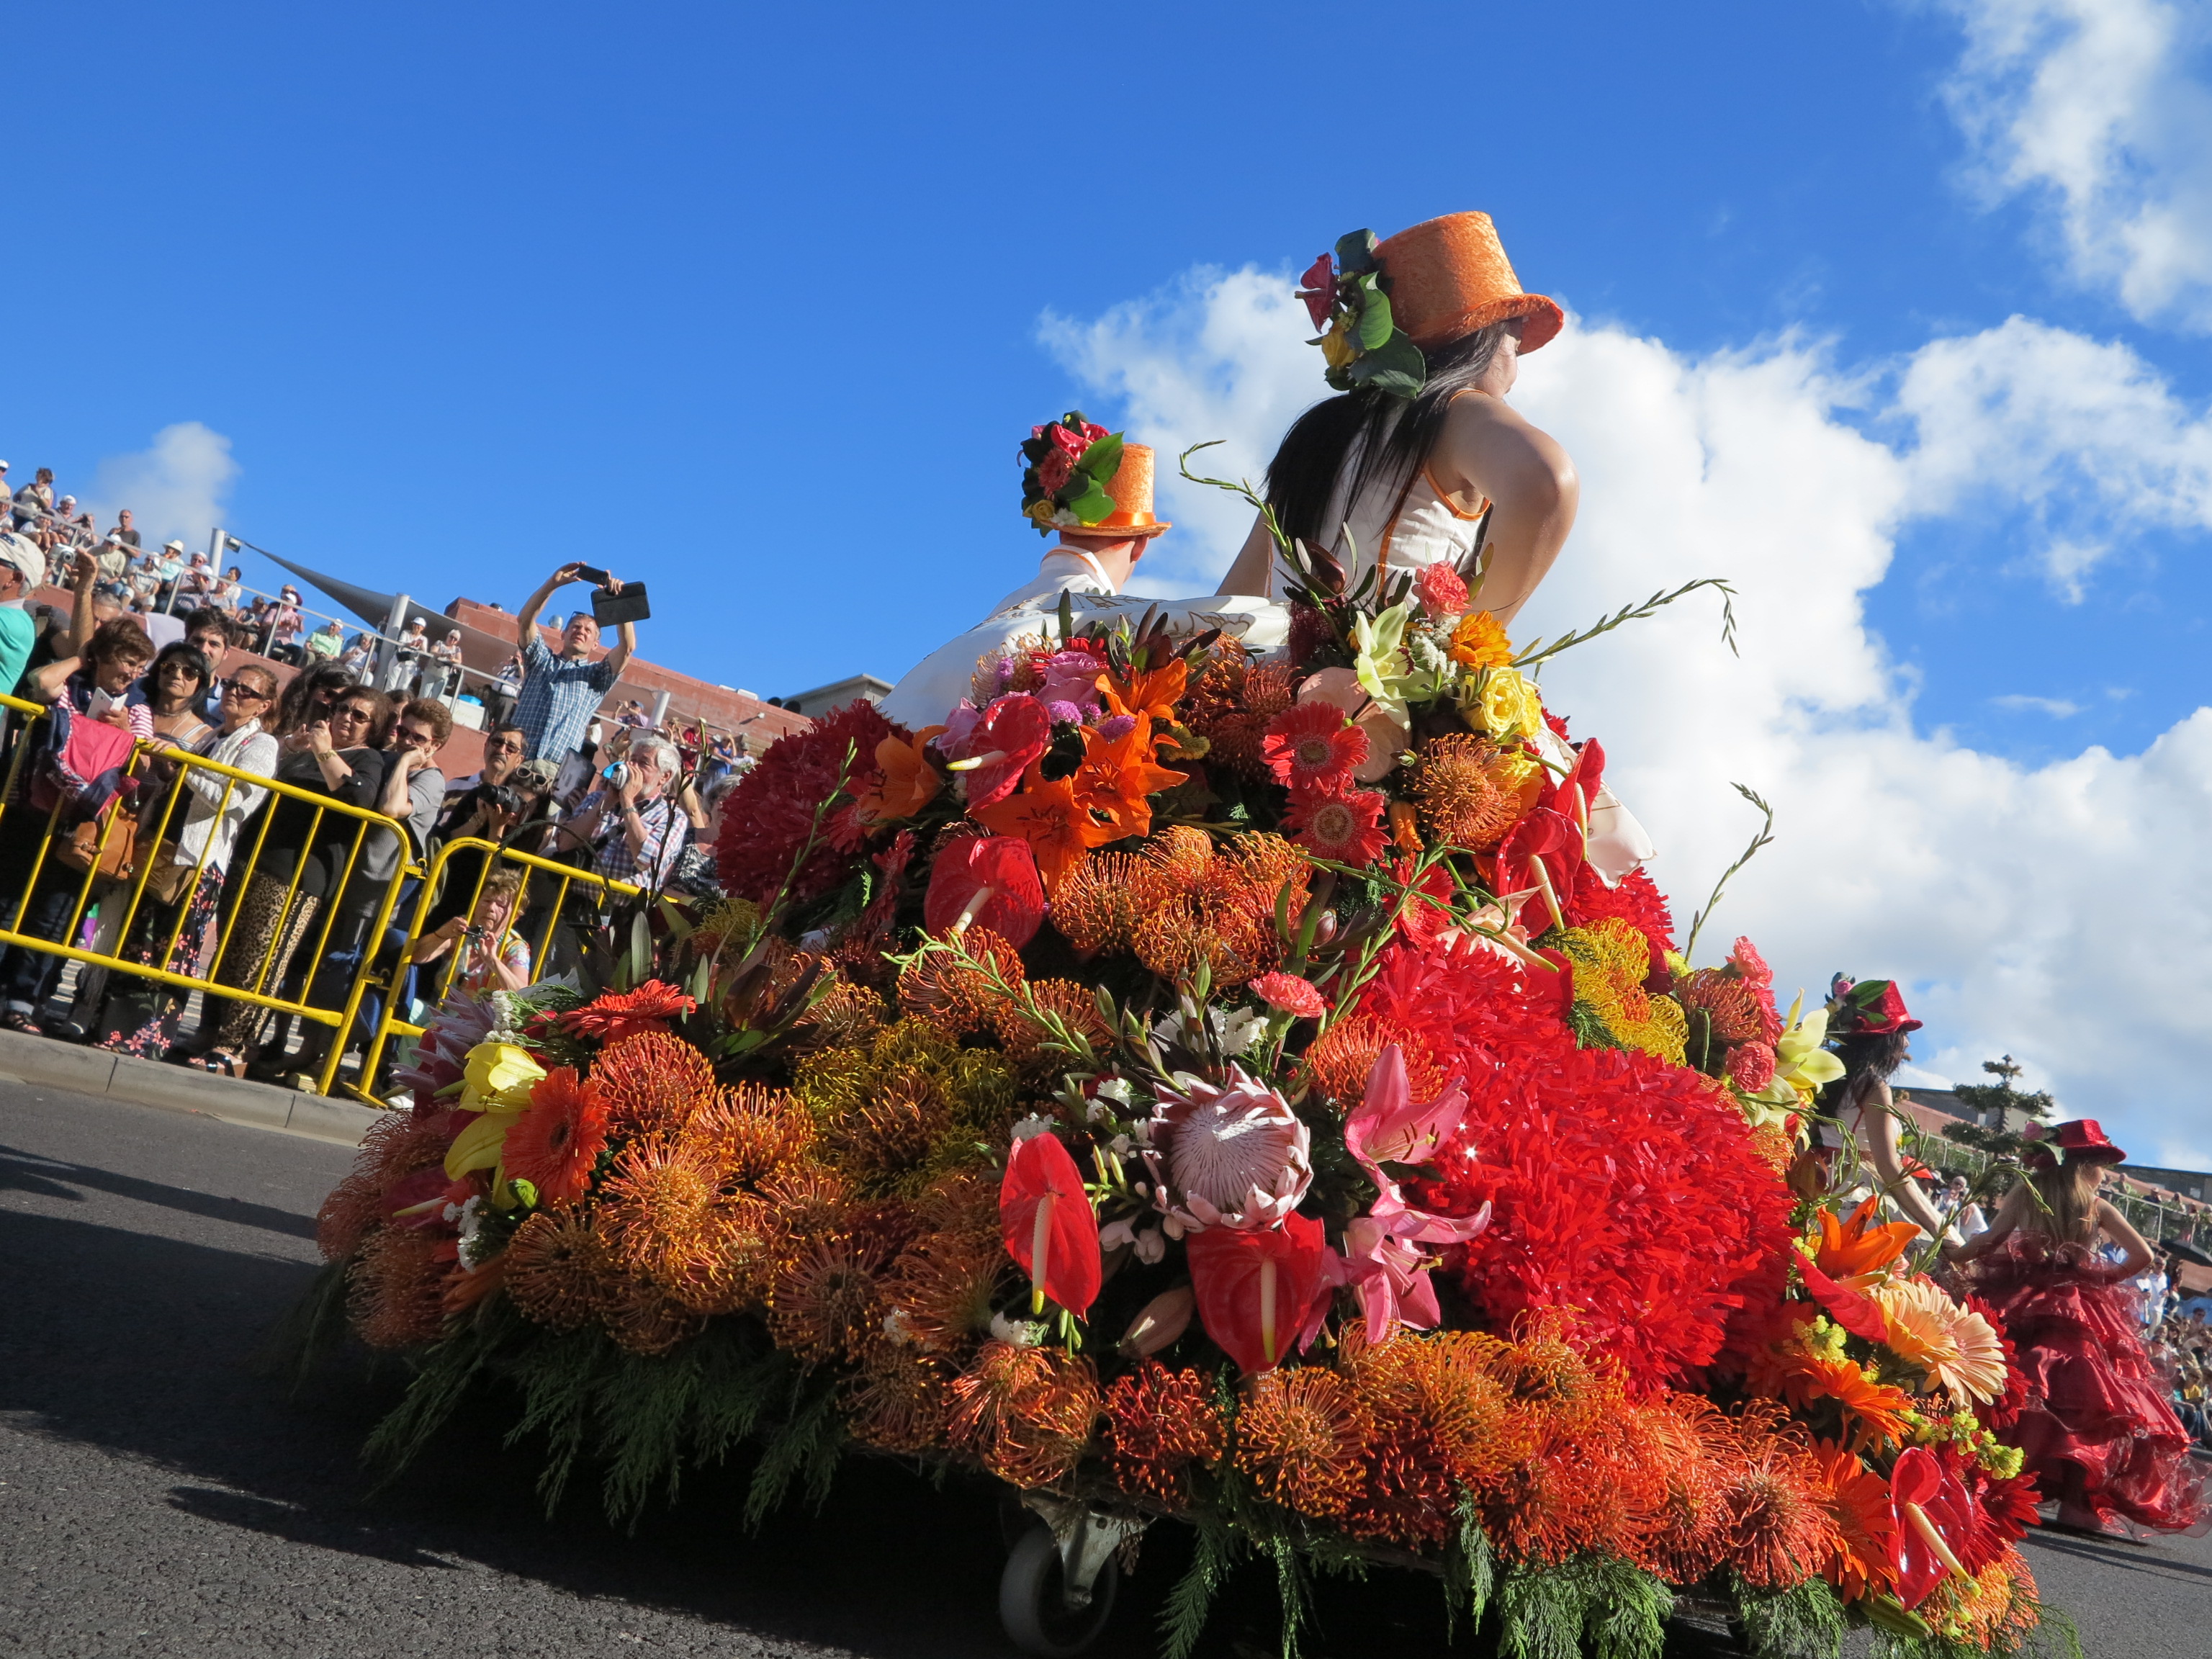 Madeira Events - Madeira Flower Festival Parade Can anyone please advise the dates for the Flower Festival next year. Can someone please confirm that next years Flower Festival is May? Does anyone know the date of the Flower Festival next year? What are the dates of next years festival?